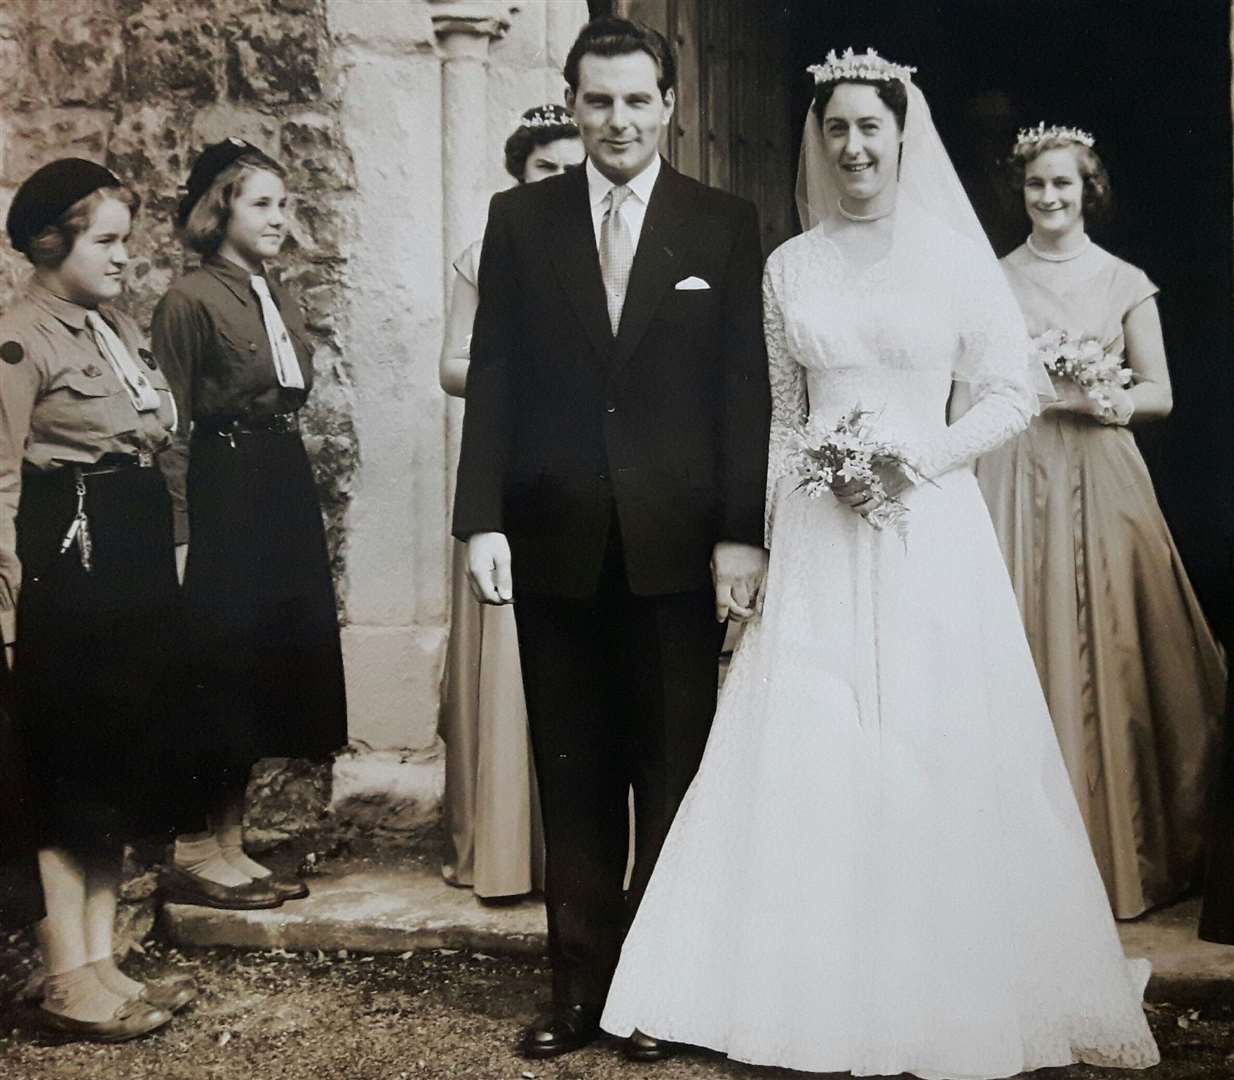 Don Esland and Ruby Finch's wedding in 1957